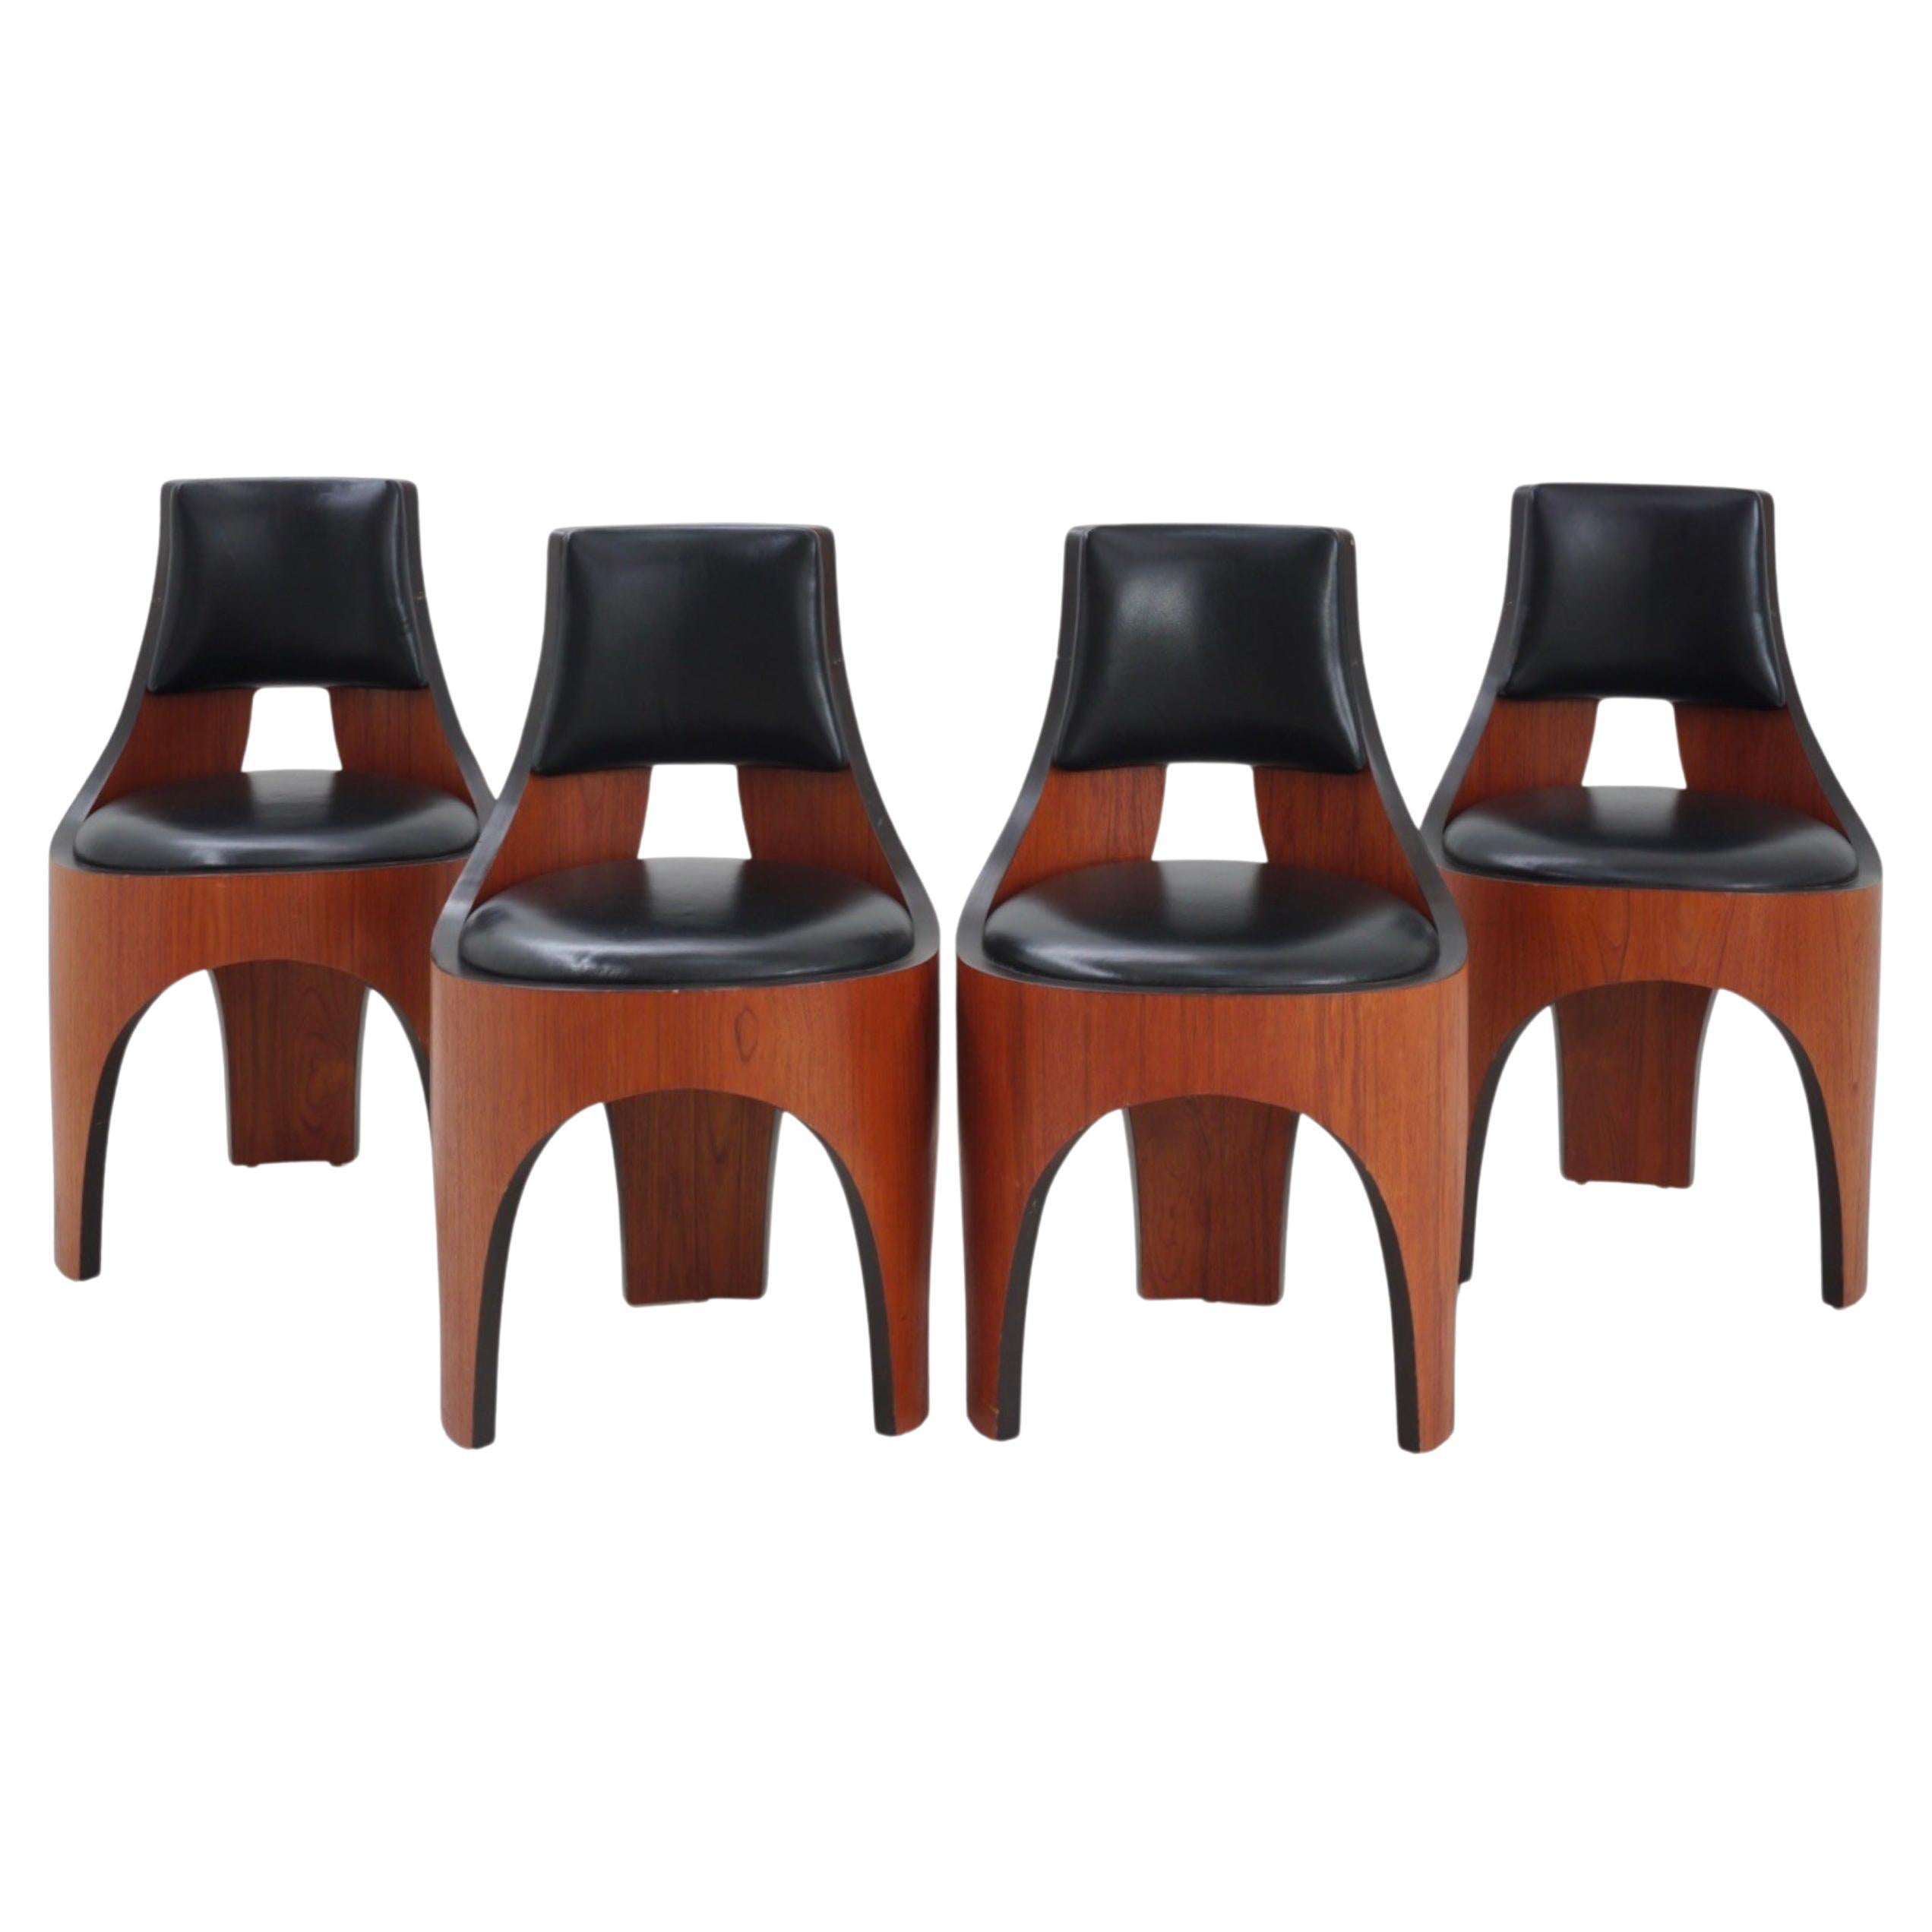 Set of 4 Cylindra Chairs by Henry P. Glass, 1966 For Sale